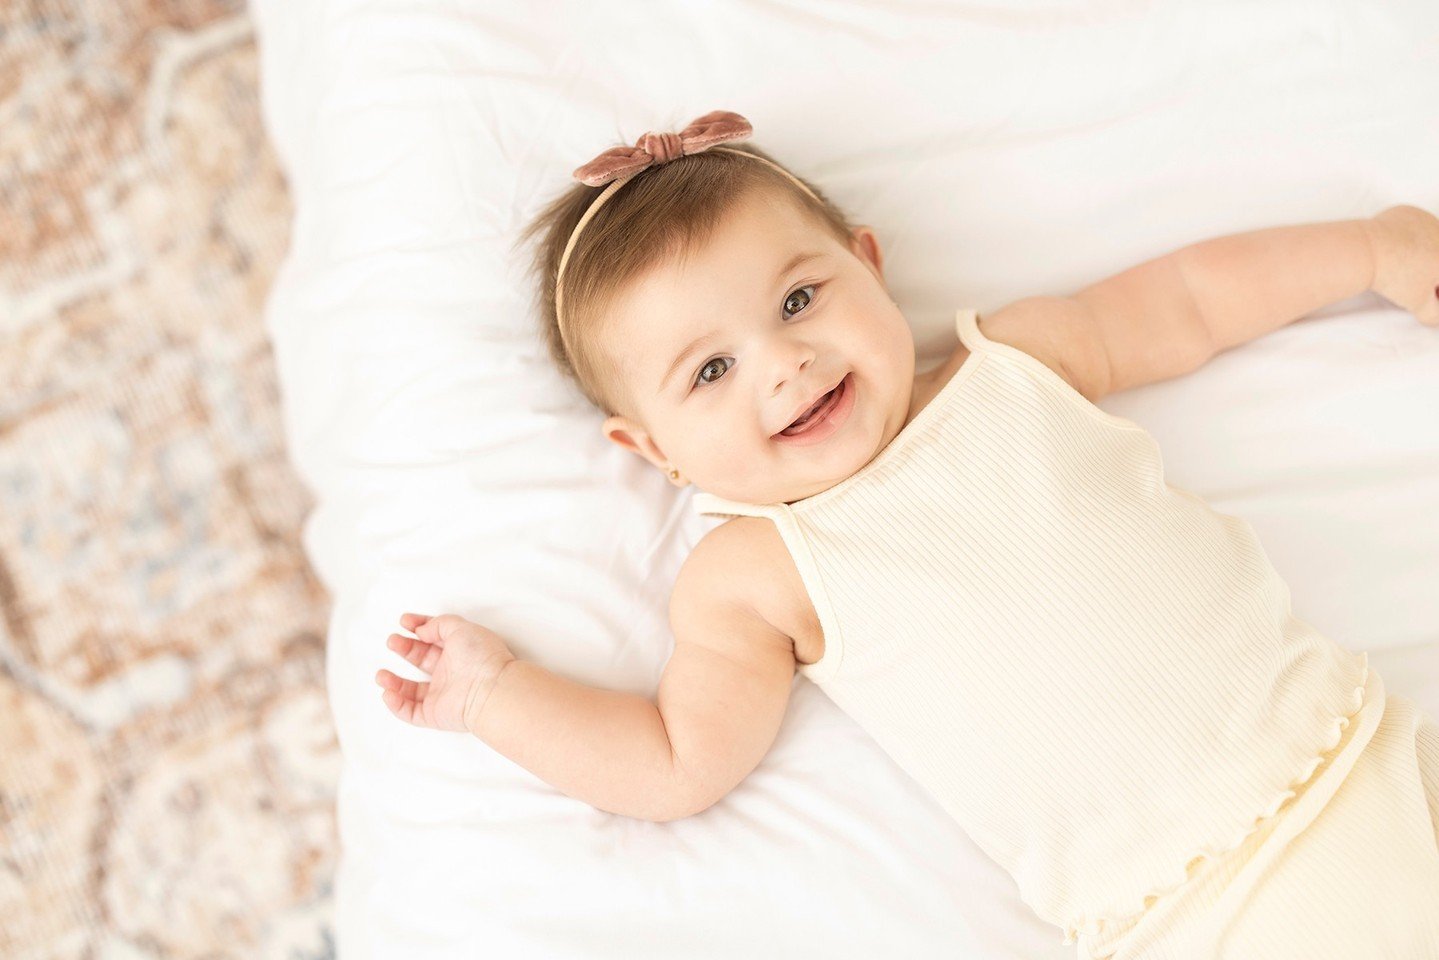 Happy girl! We cant get enough of this smile!!!!!!! 😊 
.⁠
.⁠
.⁠
#PhotographerBlog #AlbumnsofFamily  #FamilyPortraitSession #NewbornPhotographers #NewbornPhotographyProps #NewbornPhotoshoot #NewbornInspiration #PhotographyBackdrops #TheEverymom #TheB